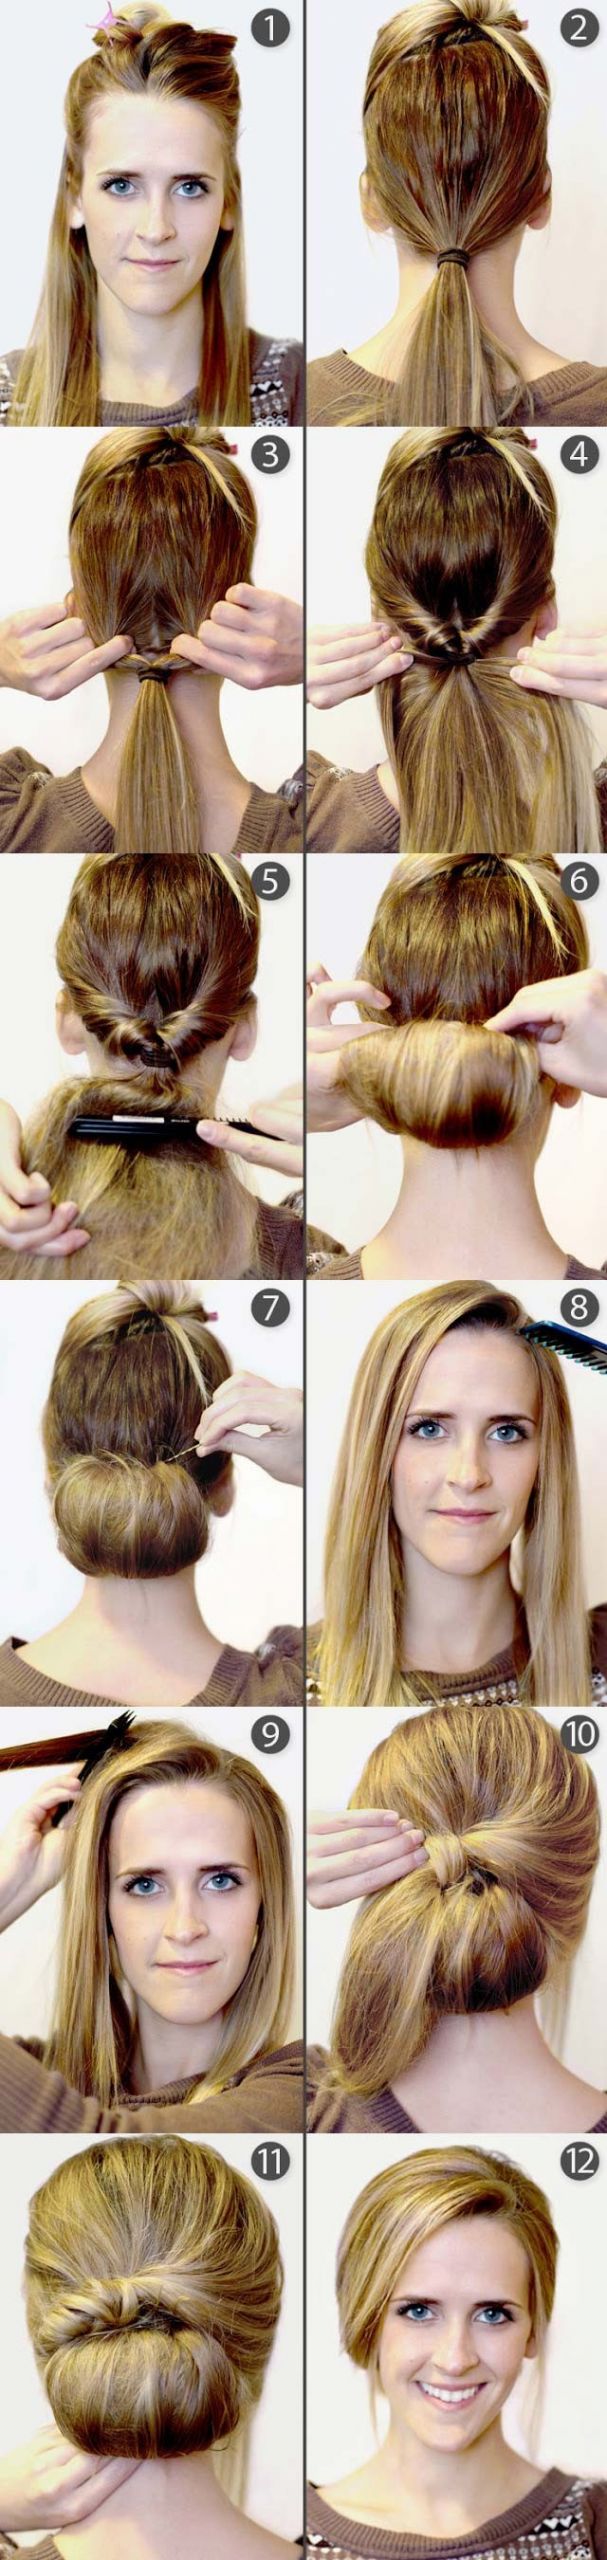 DIY Updo Hairstyles
 19 Pretty Long Hairstyles with Tutorials Pretty Designs